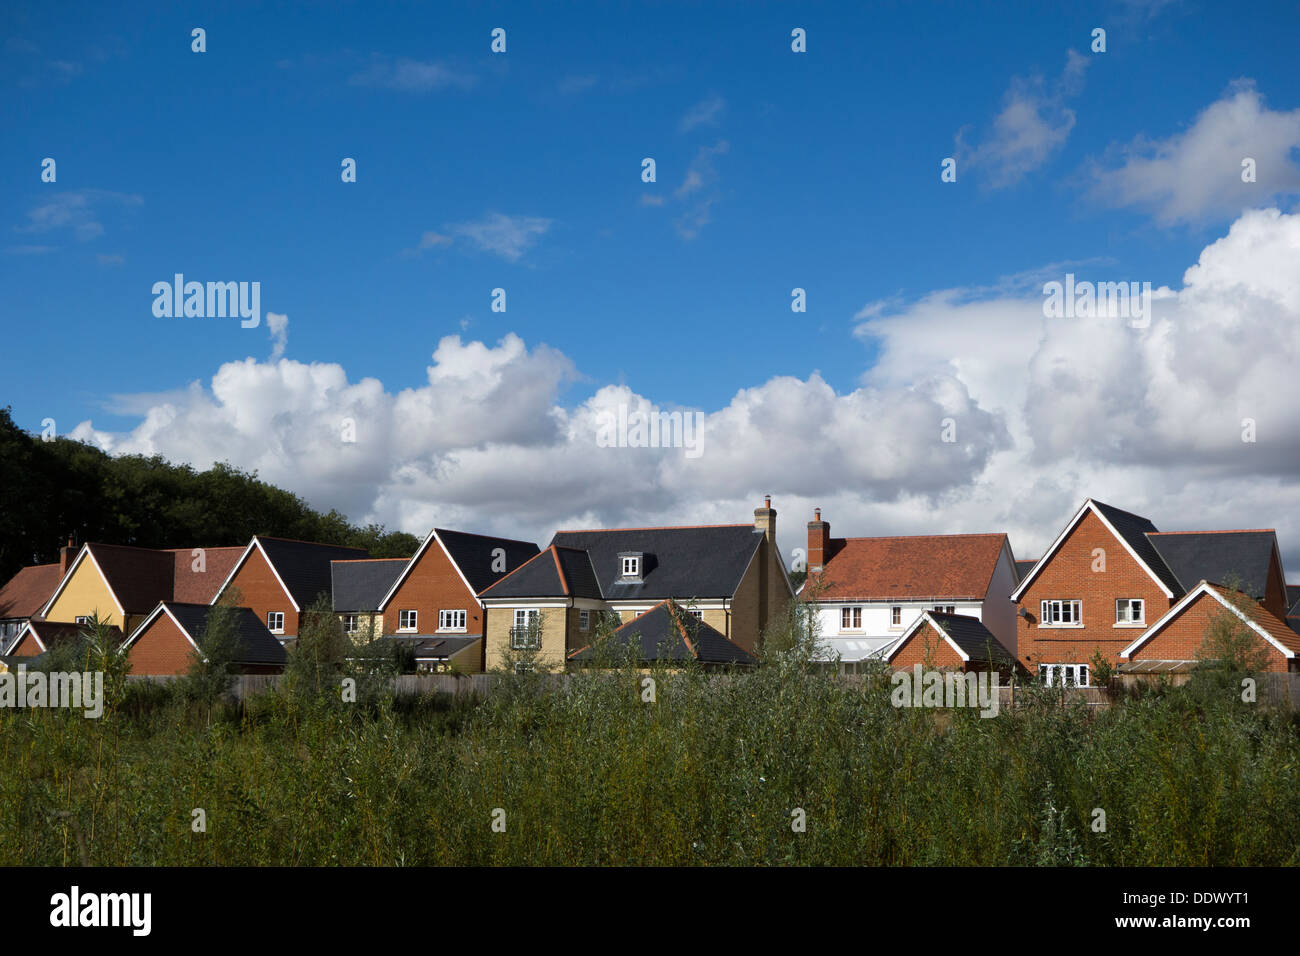 Newbuild houses on the edge of greenbelt land in England. Stock Photo